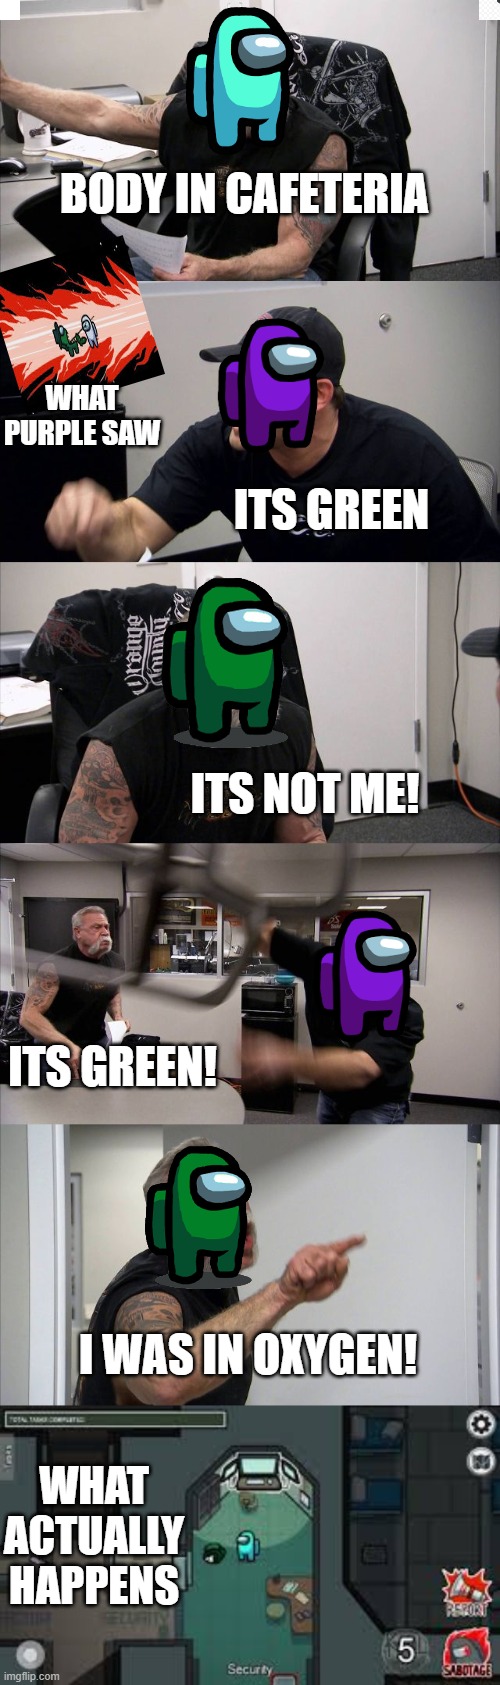 wait what | BODY IN CAFETERIA; WHAT PURPLE SAW; ITS GREEN; ITS NOT ME! ITS GREEN! I WAS IN OXYGEN! WHAT ACTUALLY HAPPENS | image tagged in memes,american chopper argument | made w/ Imgflip meme maker